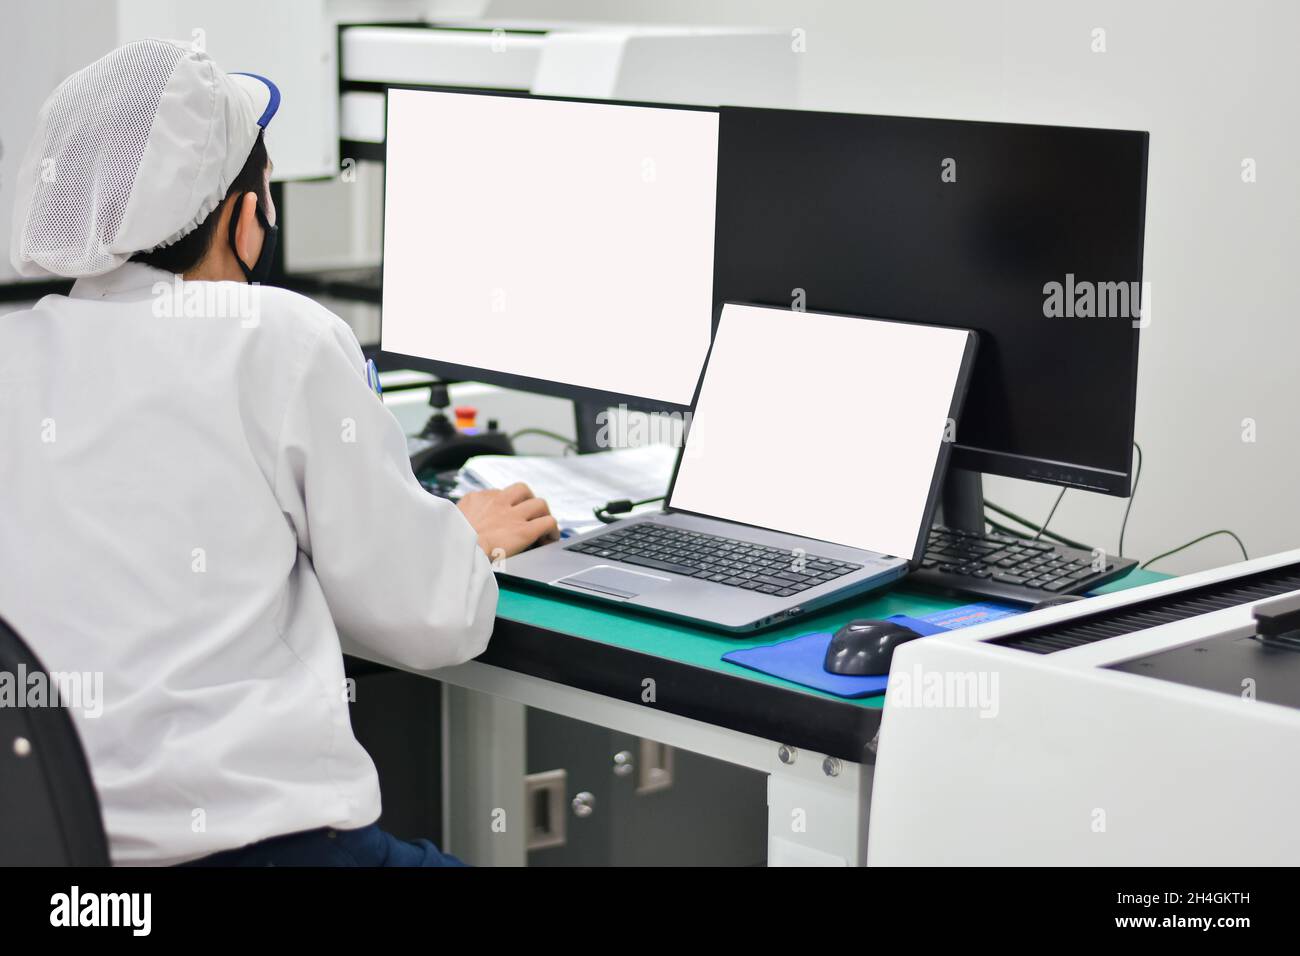 Operator working with computer design product in factory industry Stock Photo